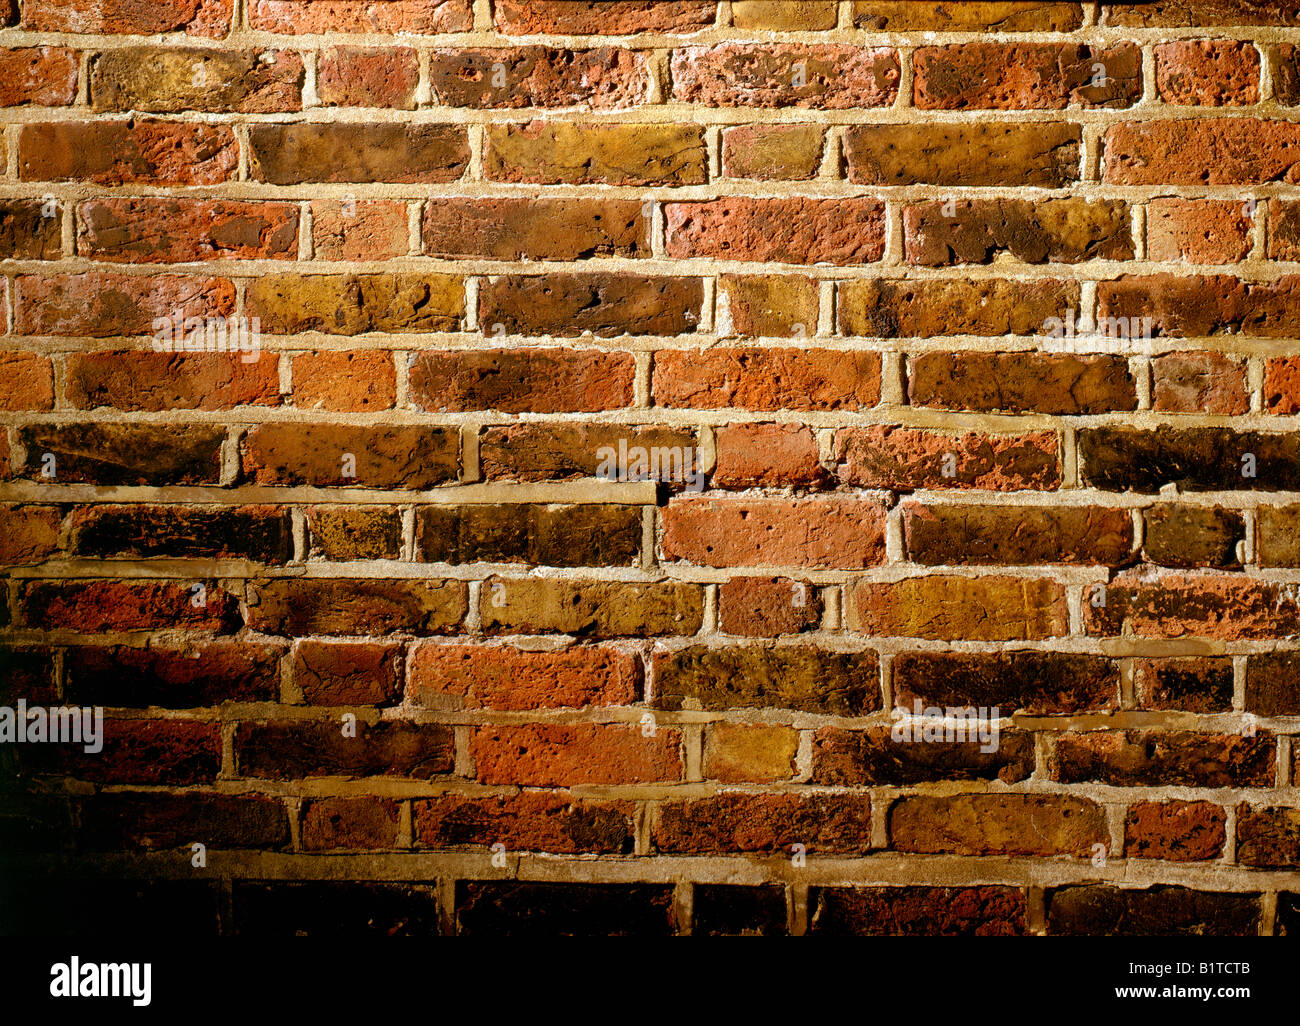 BRICKWALL SHOWING TEXTURE AND CHARACTER Stock Photo